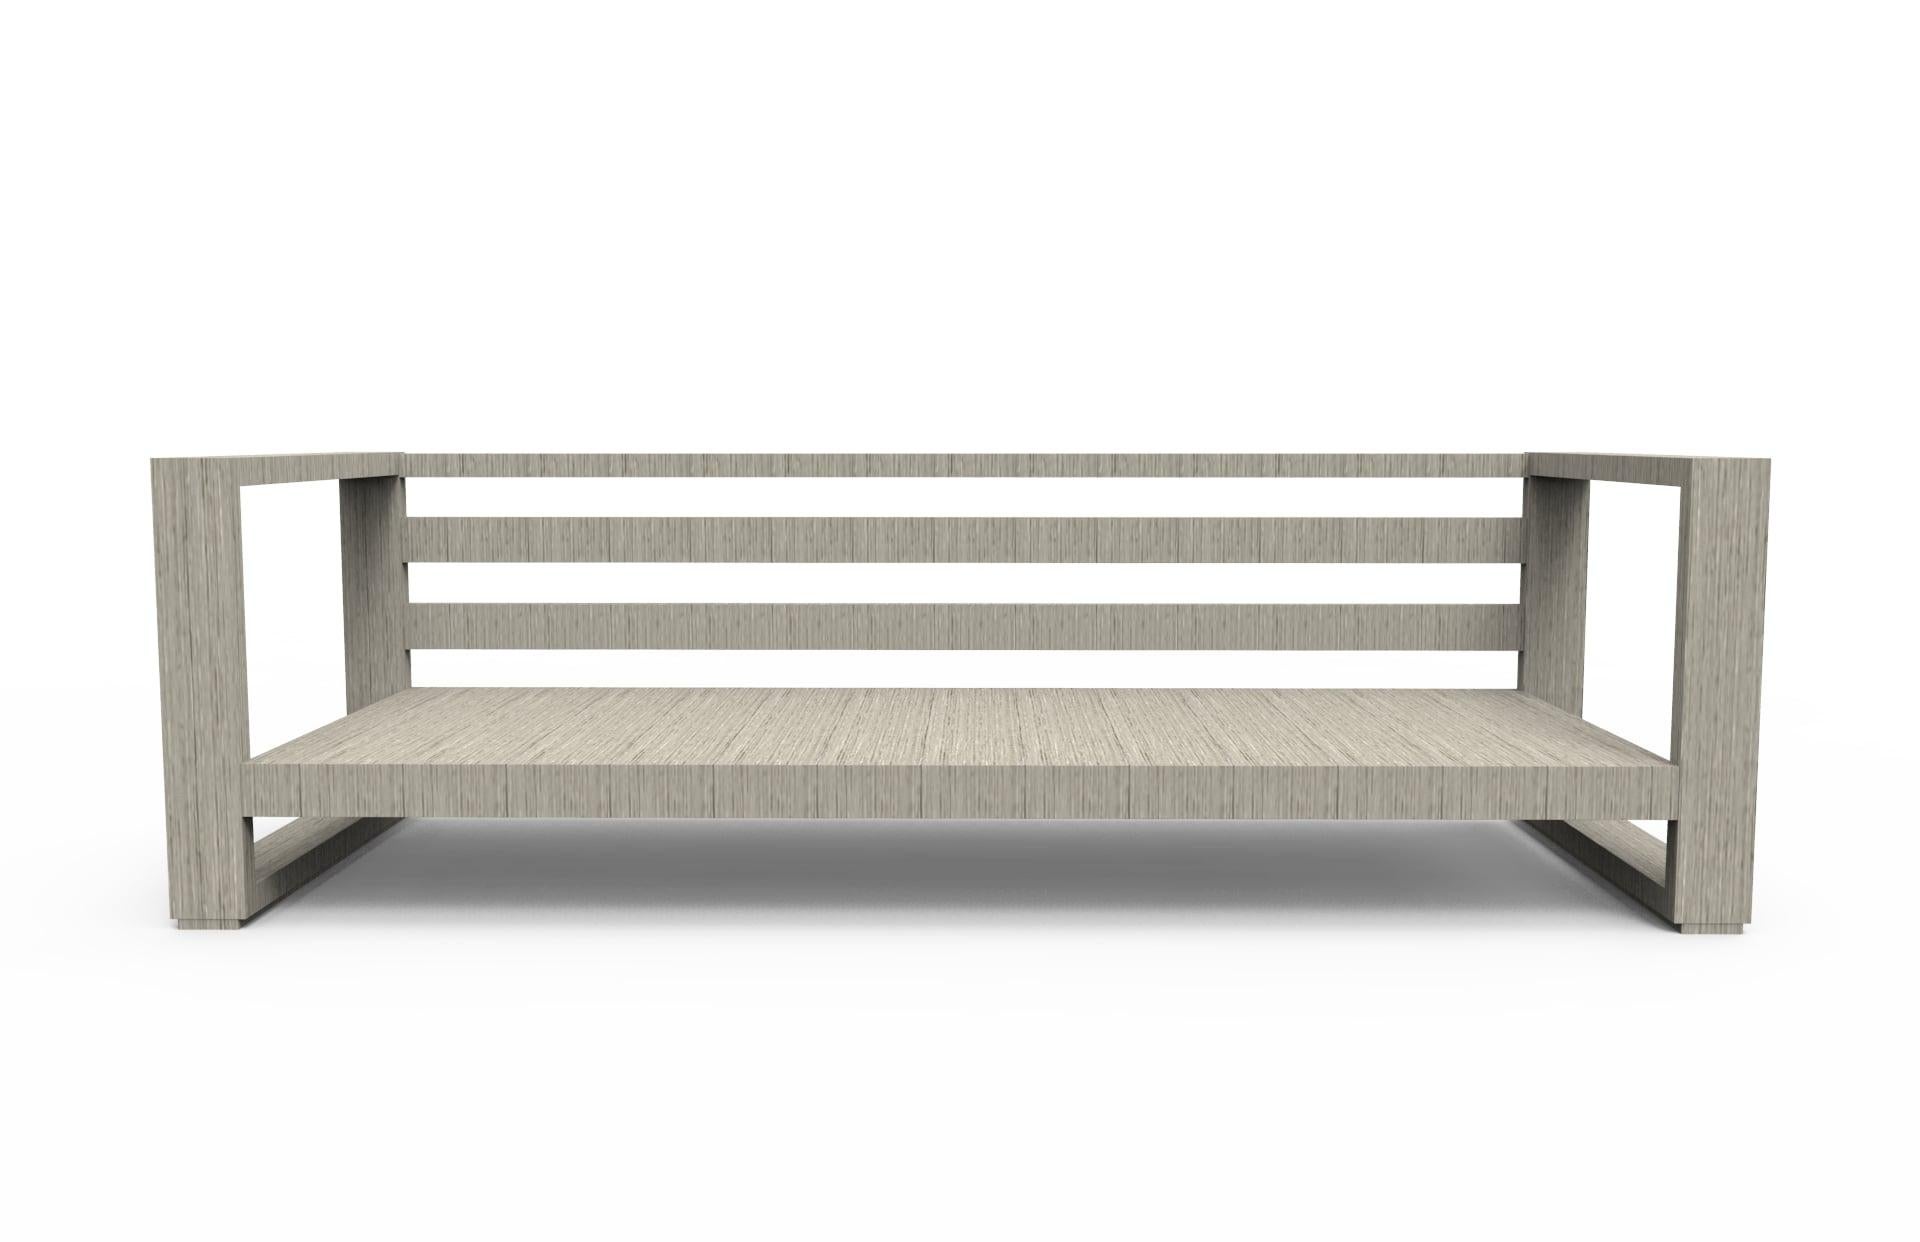 Hand-Crafted Brixton Teak Sofa 'Grade A': Wire Brushed Weathered Gray, Canvas Navy For Sale